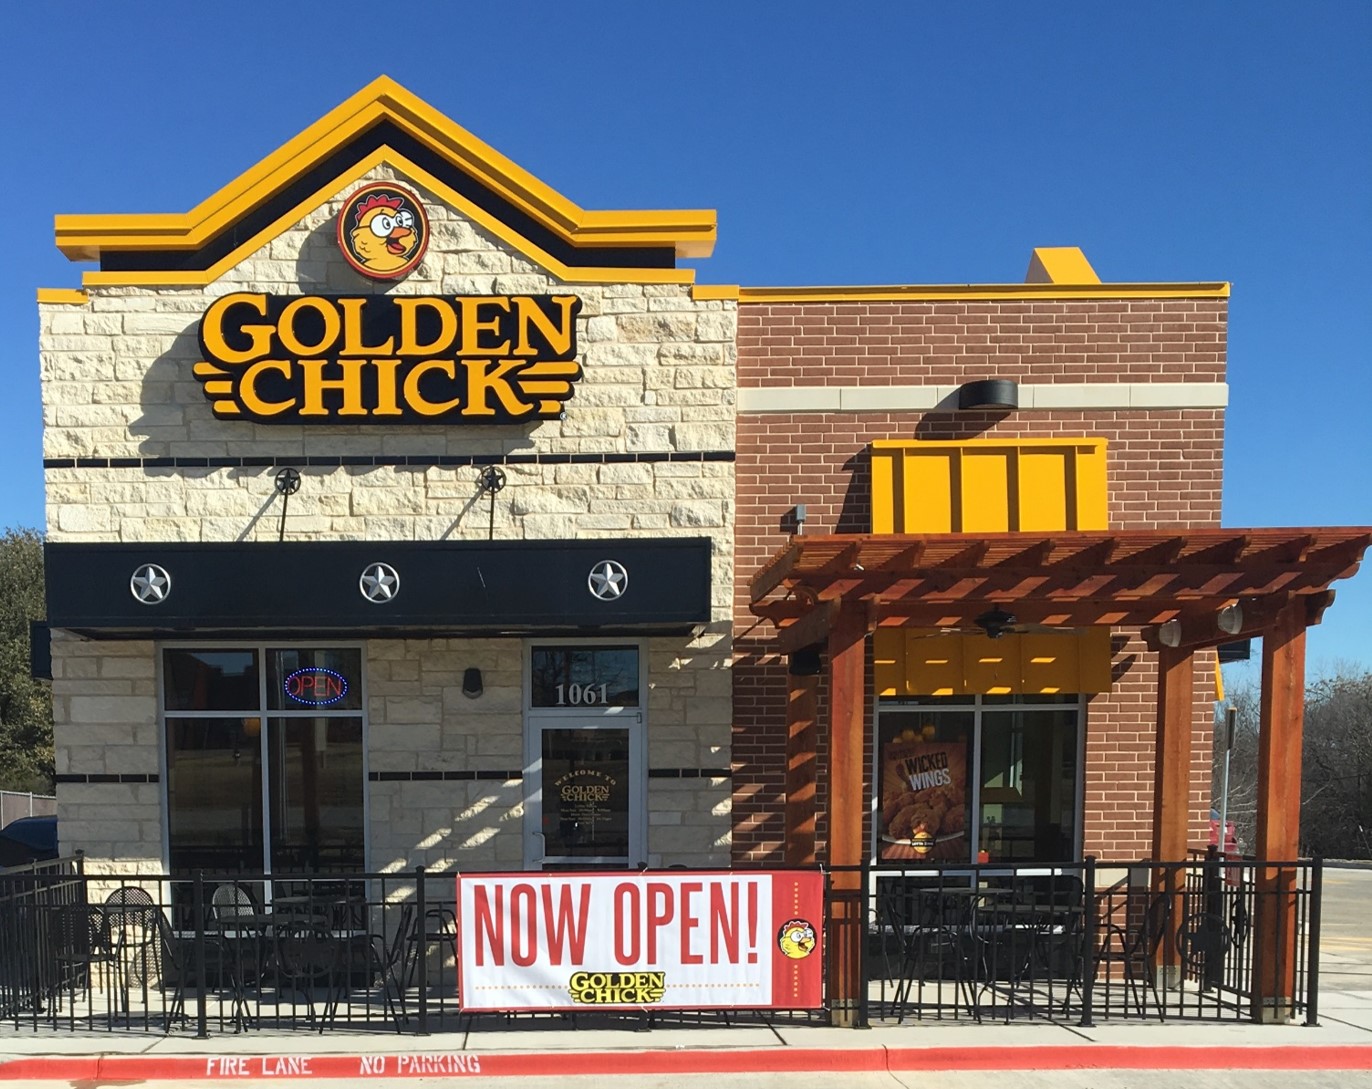 Golden Chick storefront.  Your local Golden Chick fast food restaurant in Midlothian, Texas